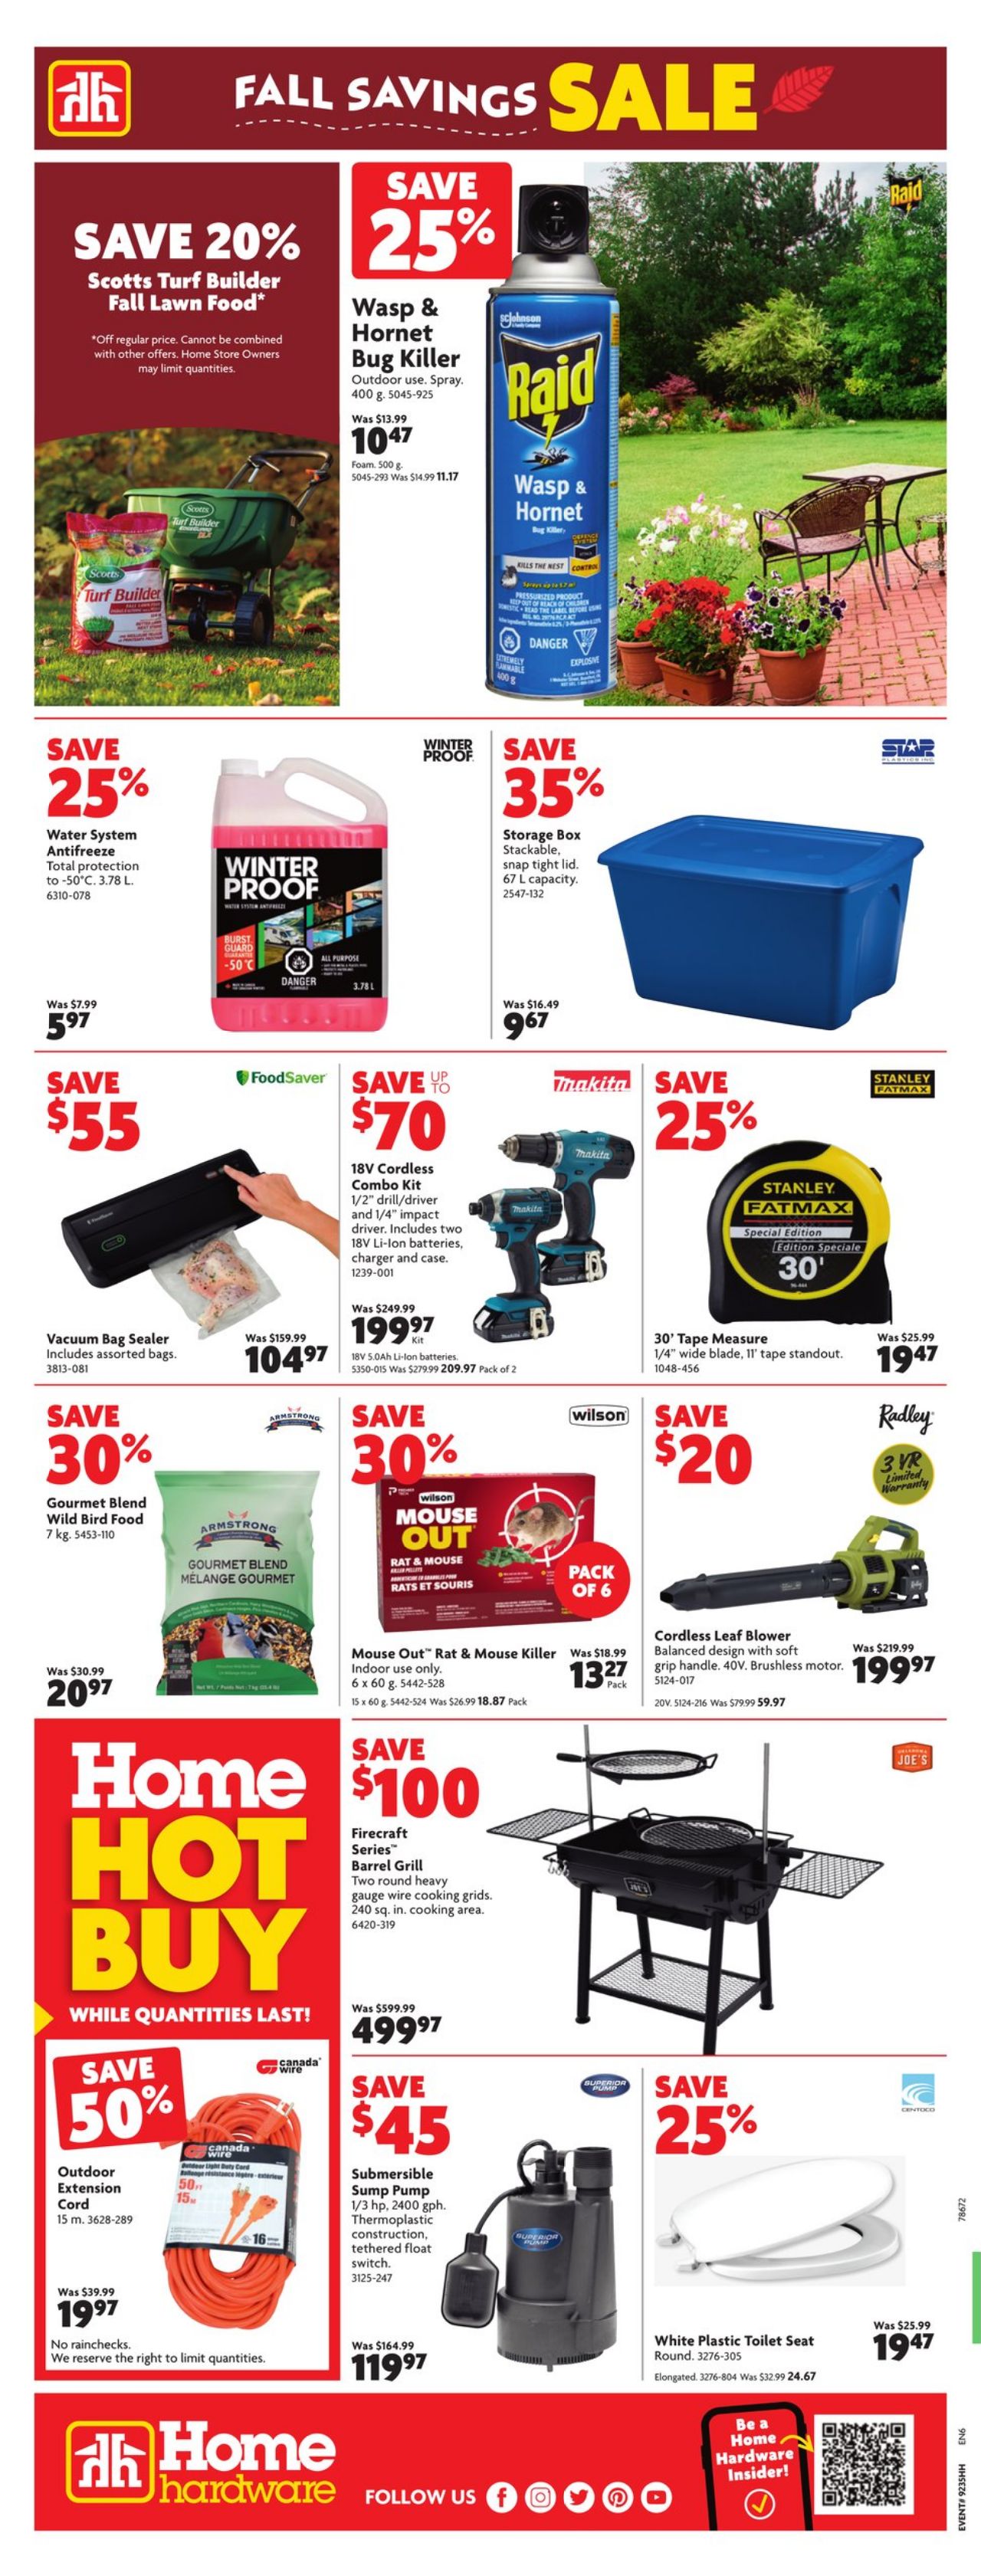 Home Hardware Flyer from 08/31/2023